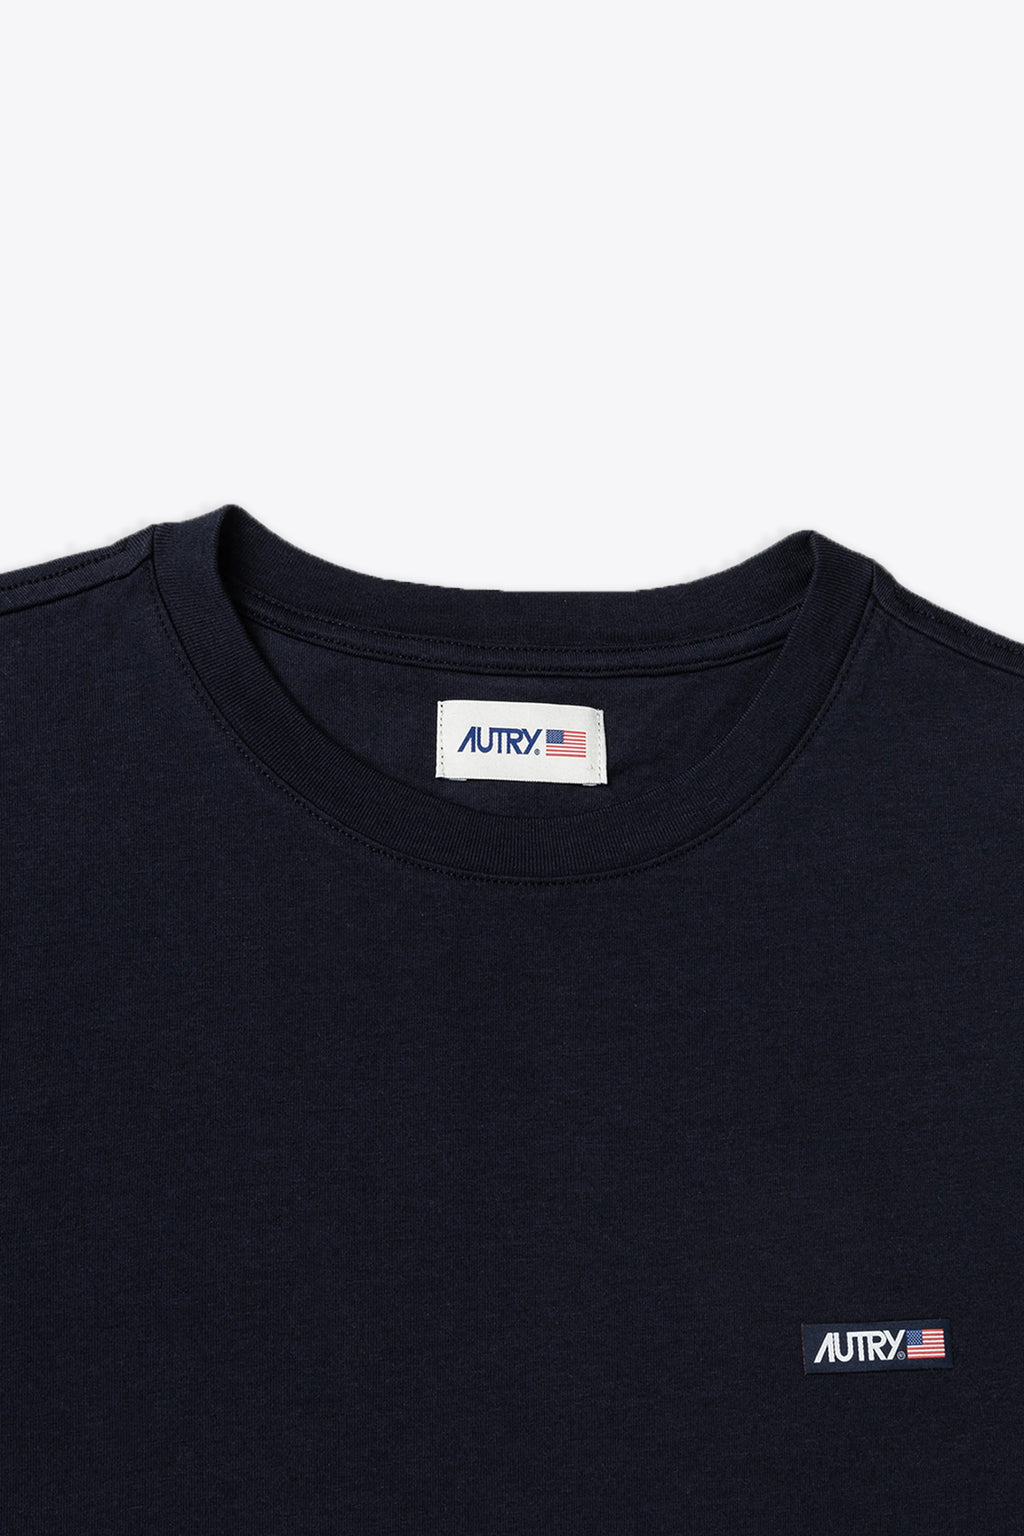 alt-image__Dark-blue-cotton-relaxed-fit-t-shirt-with-logo-patch